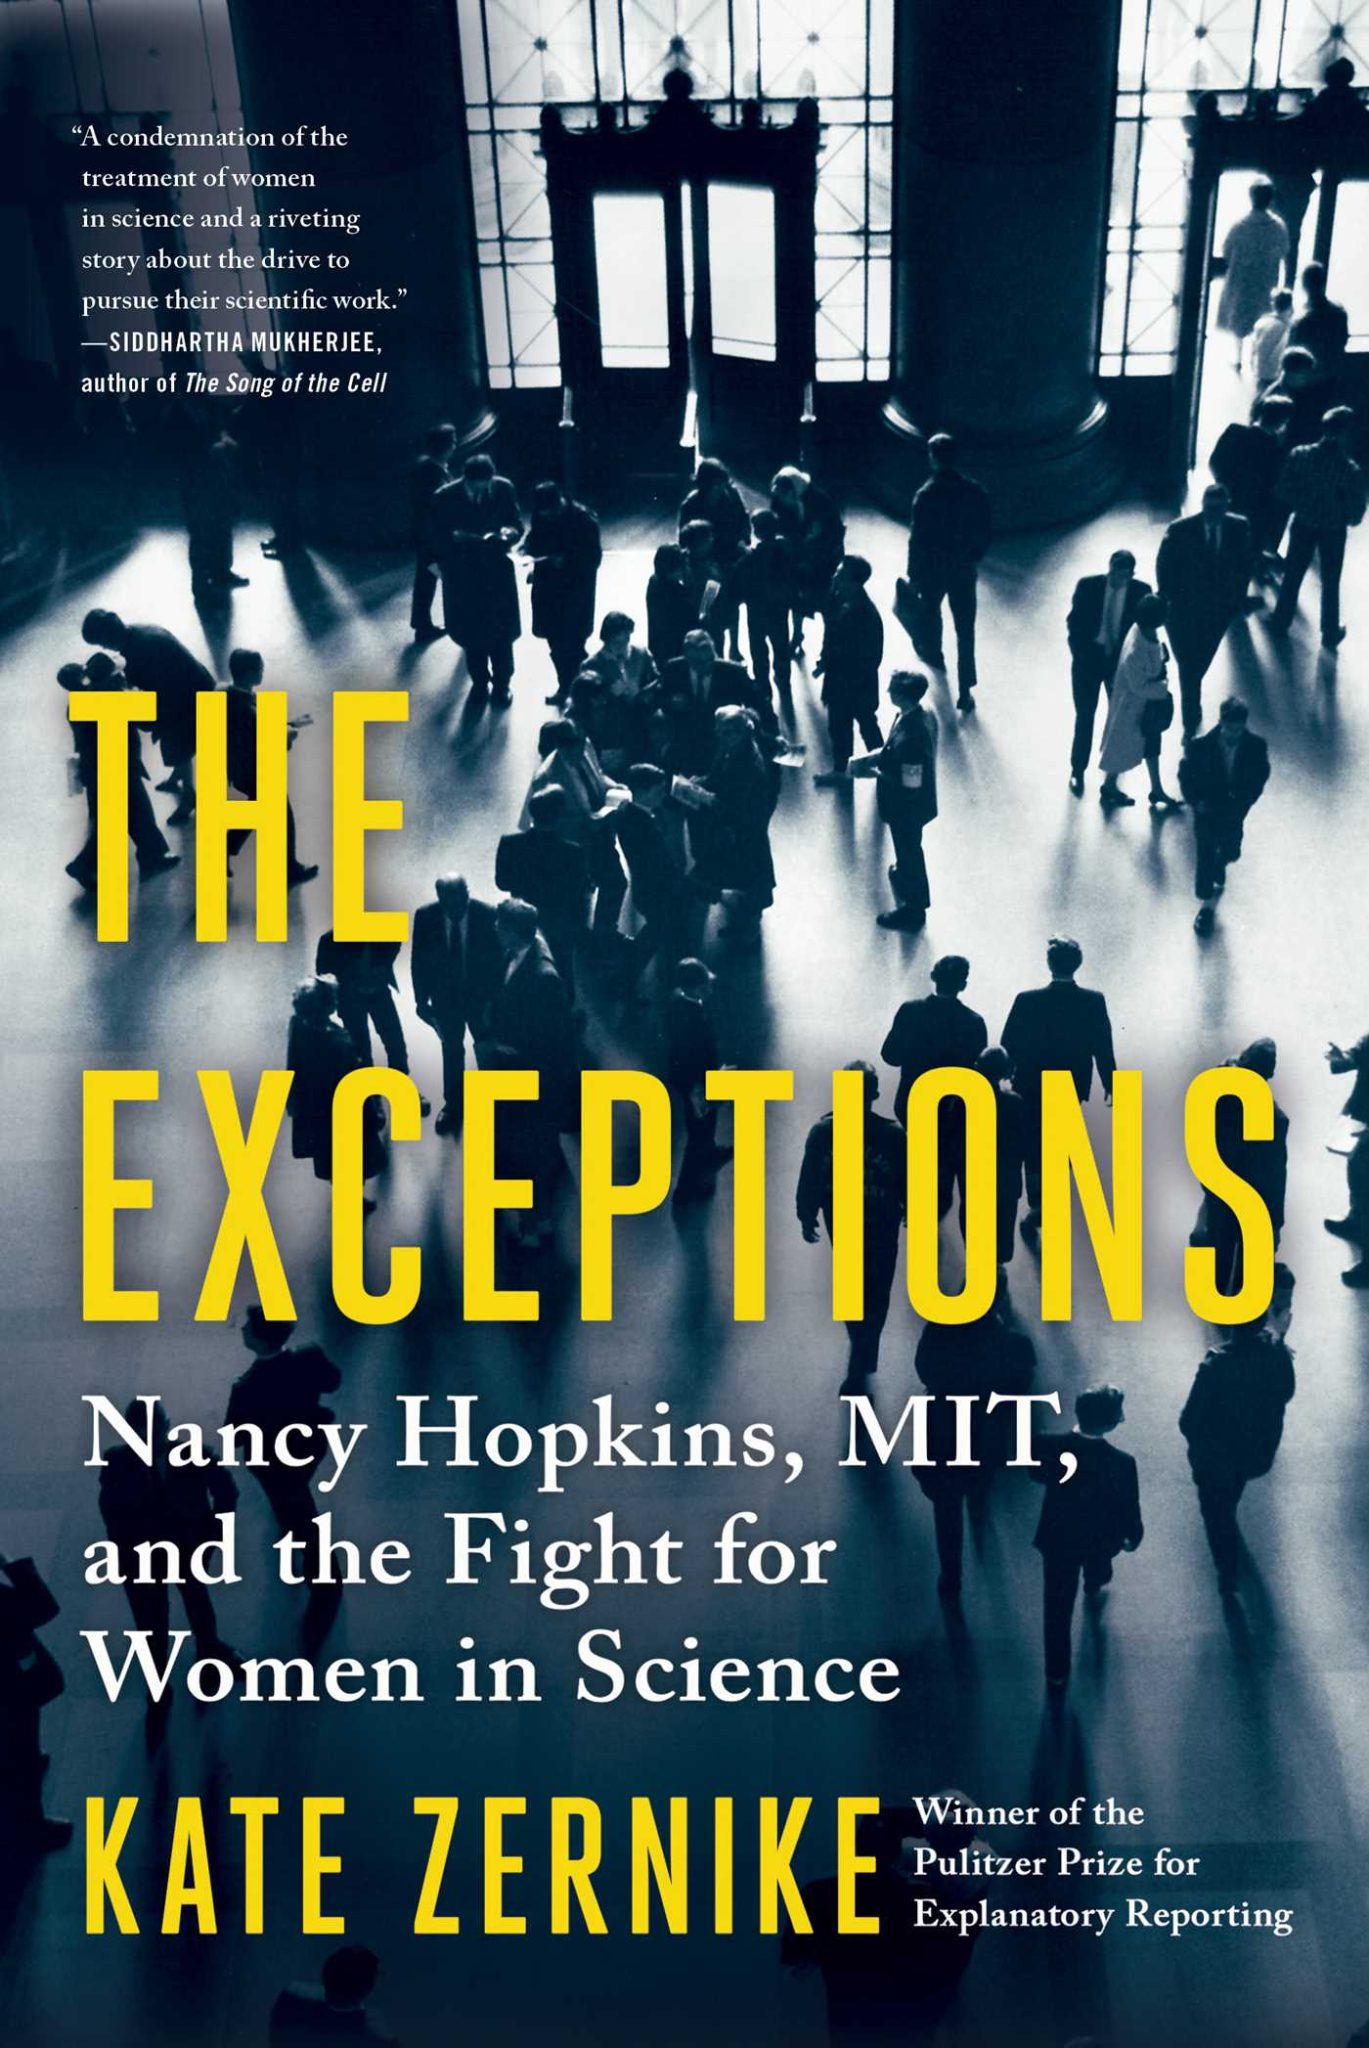 Book cover of The Exceptions by Kate Zernike